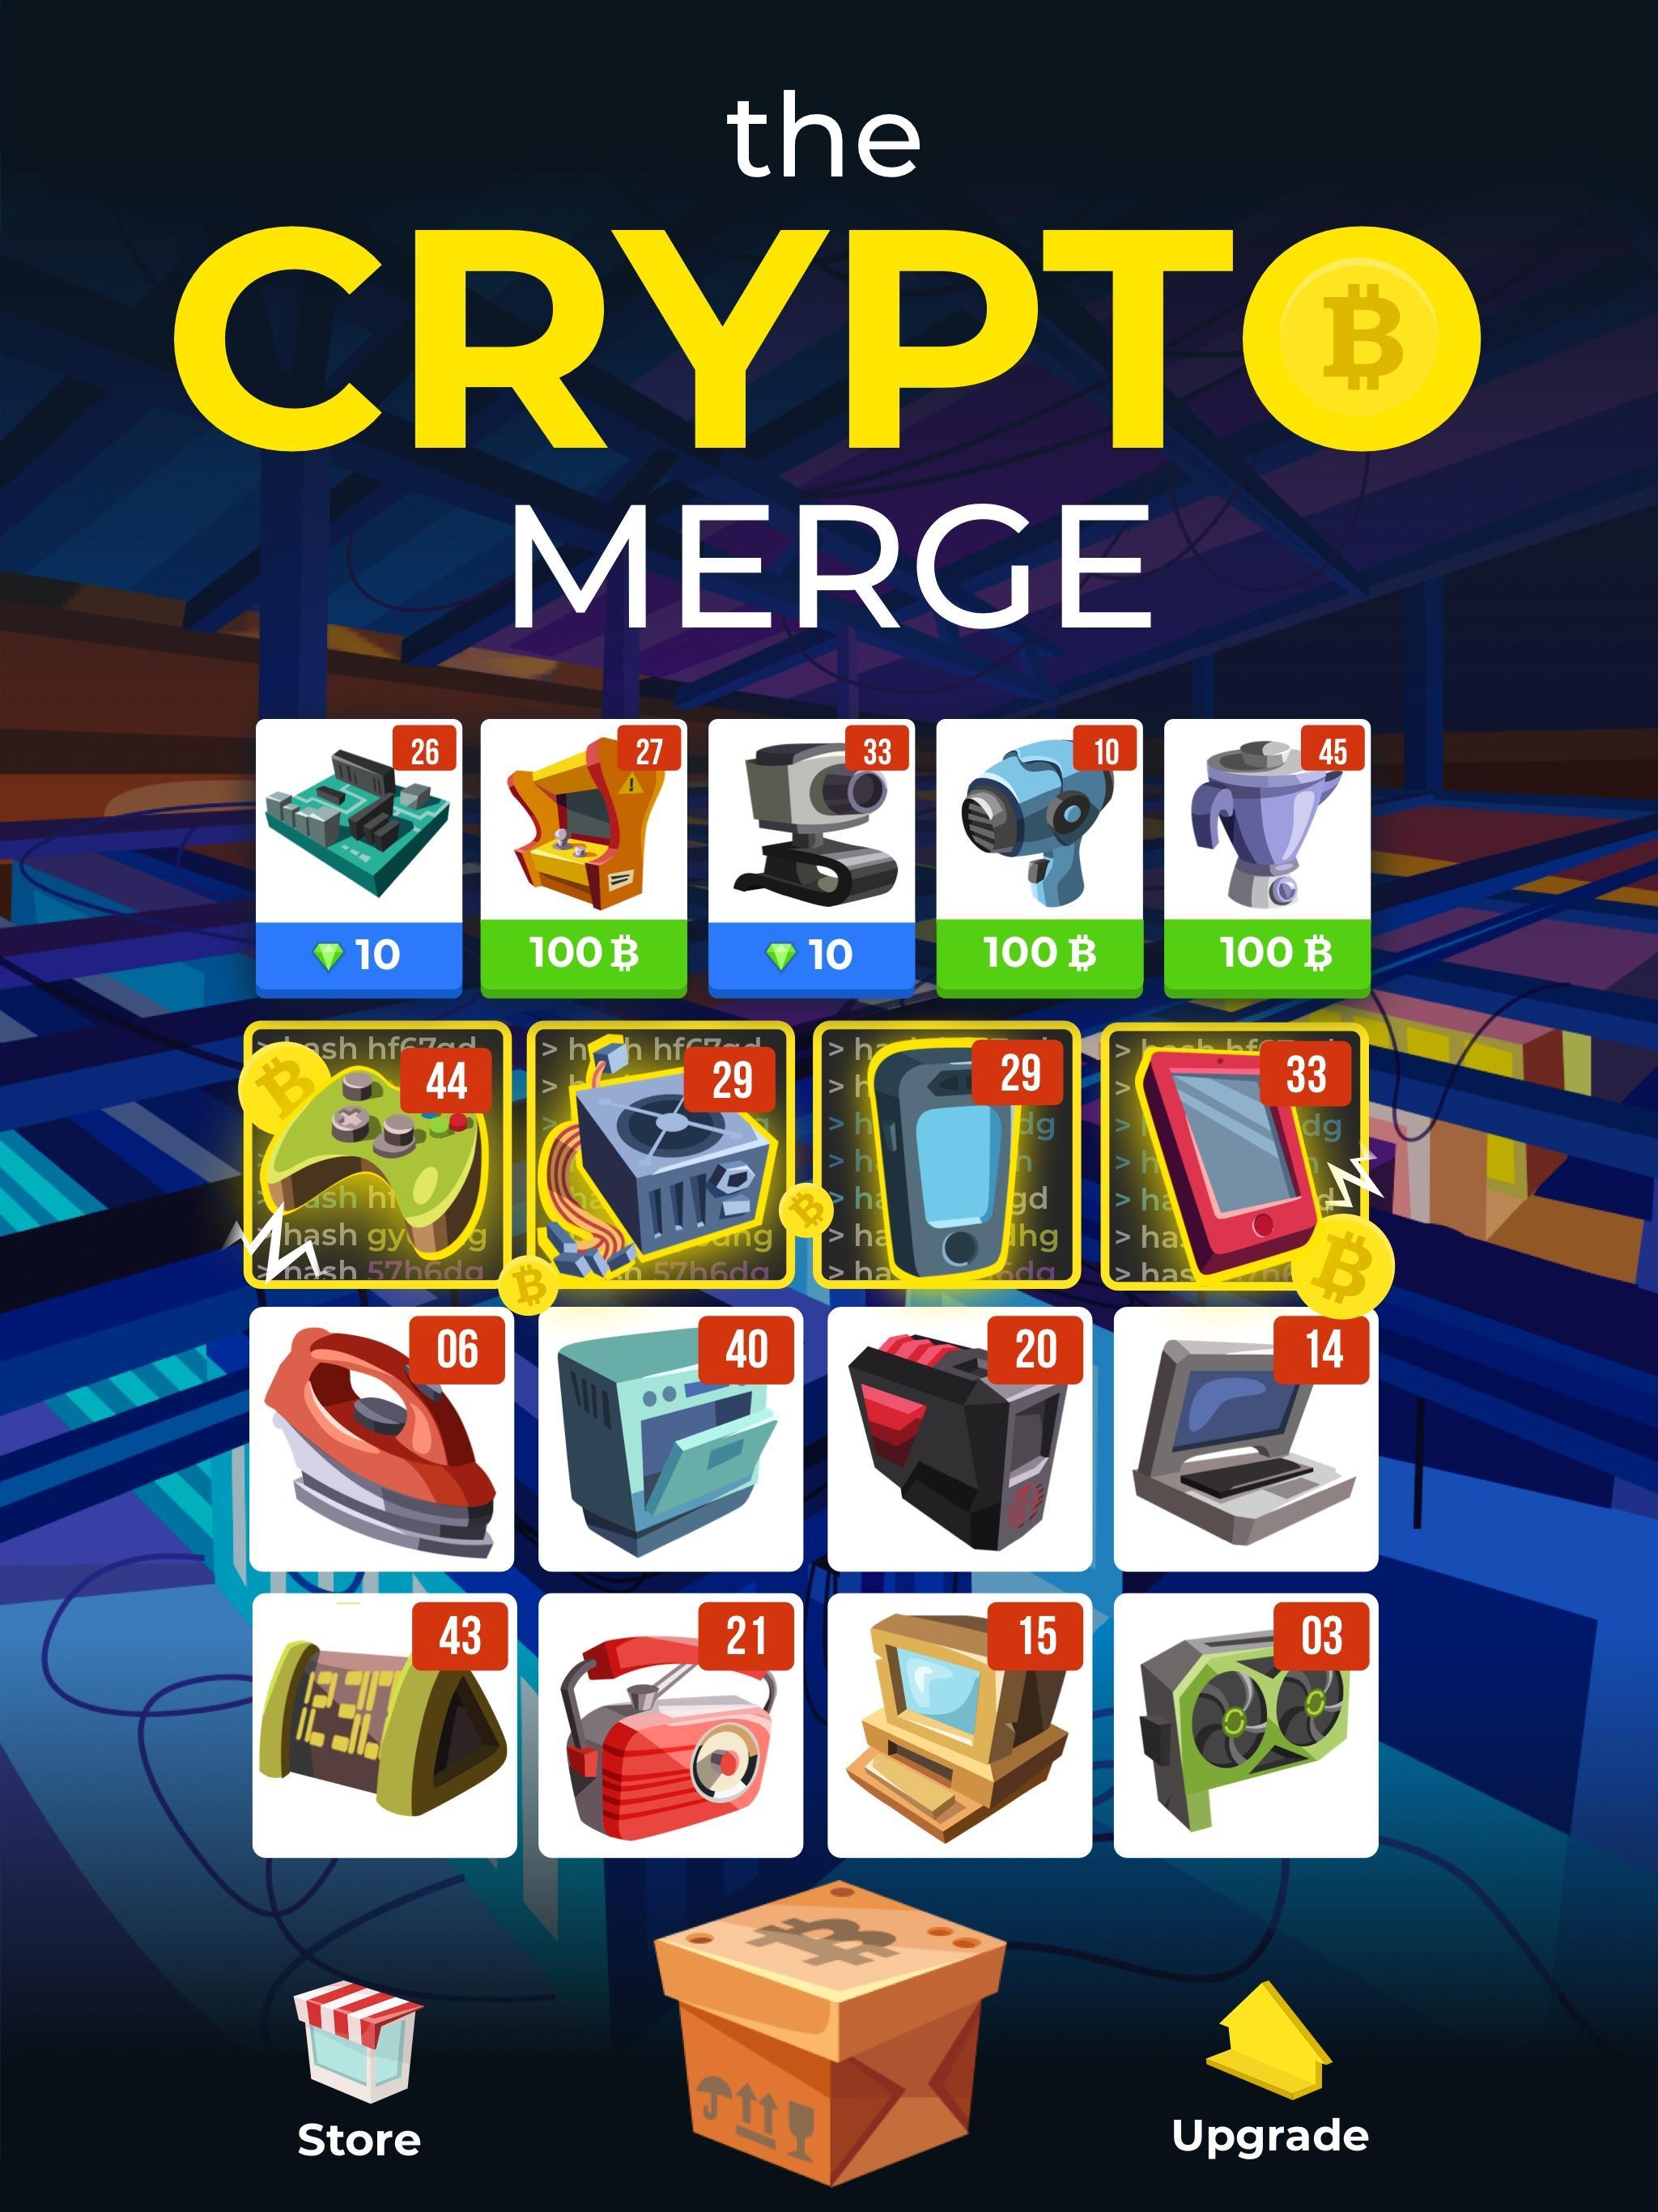 The Crypto Merge - bitcoin mining simulator for Android ...